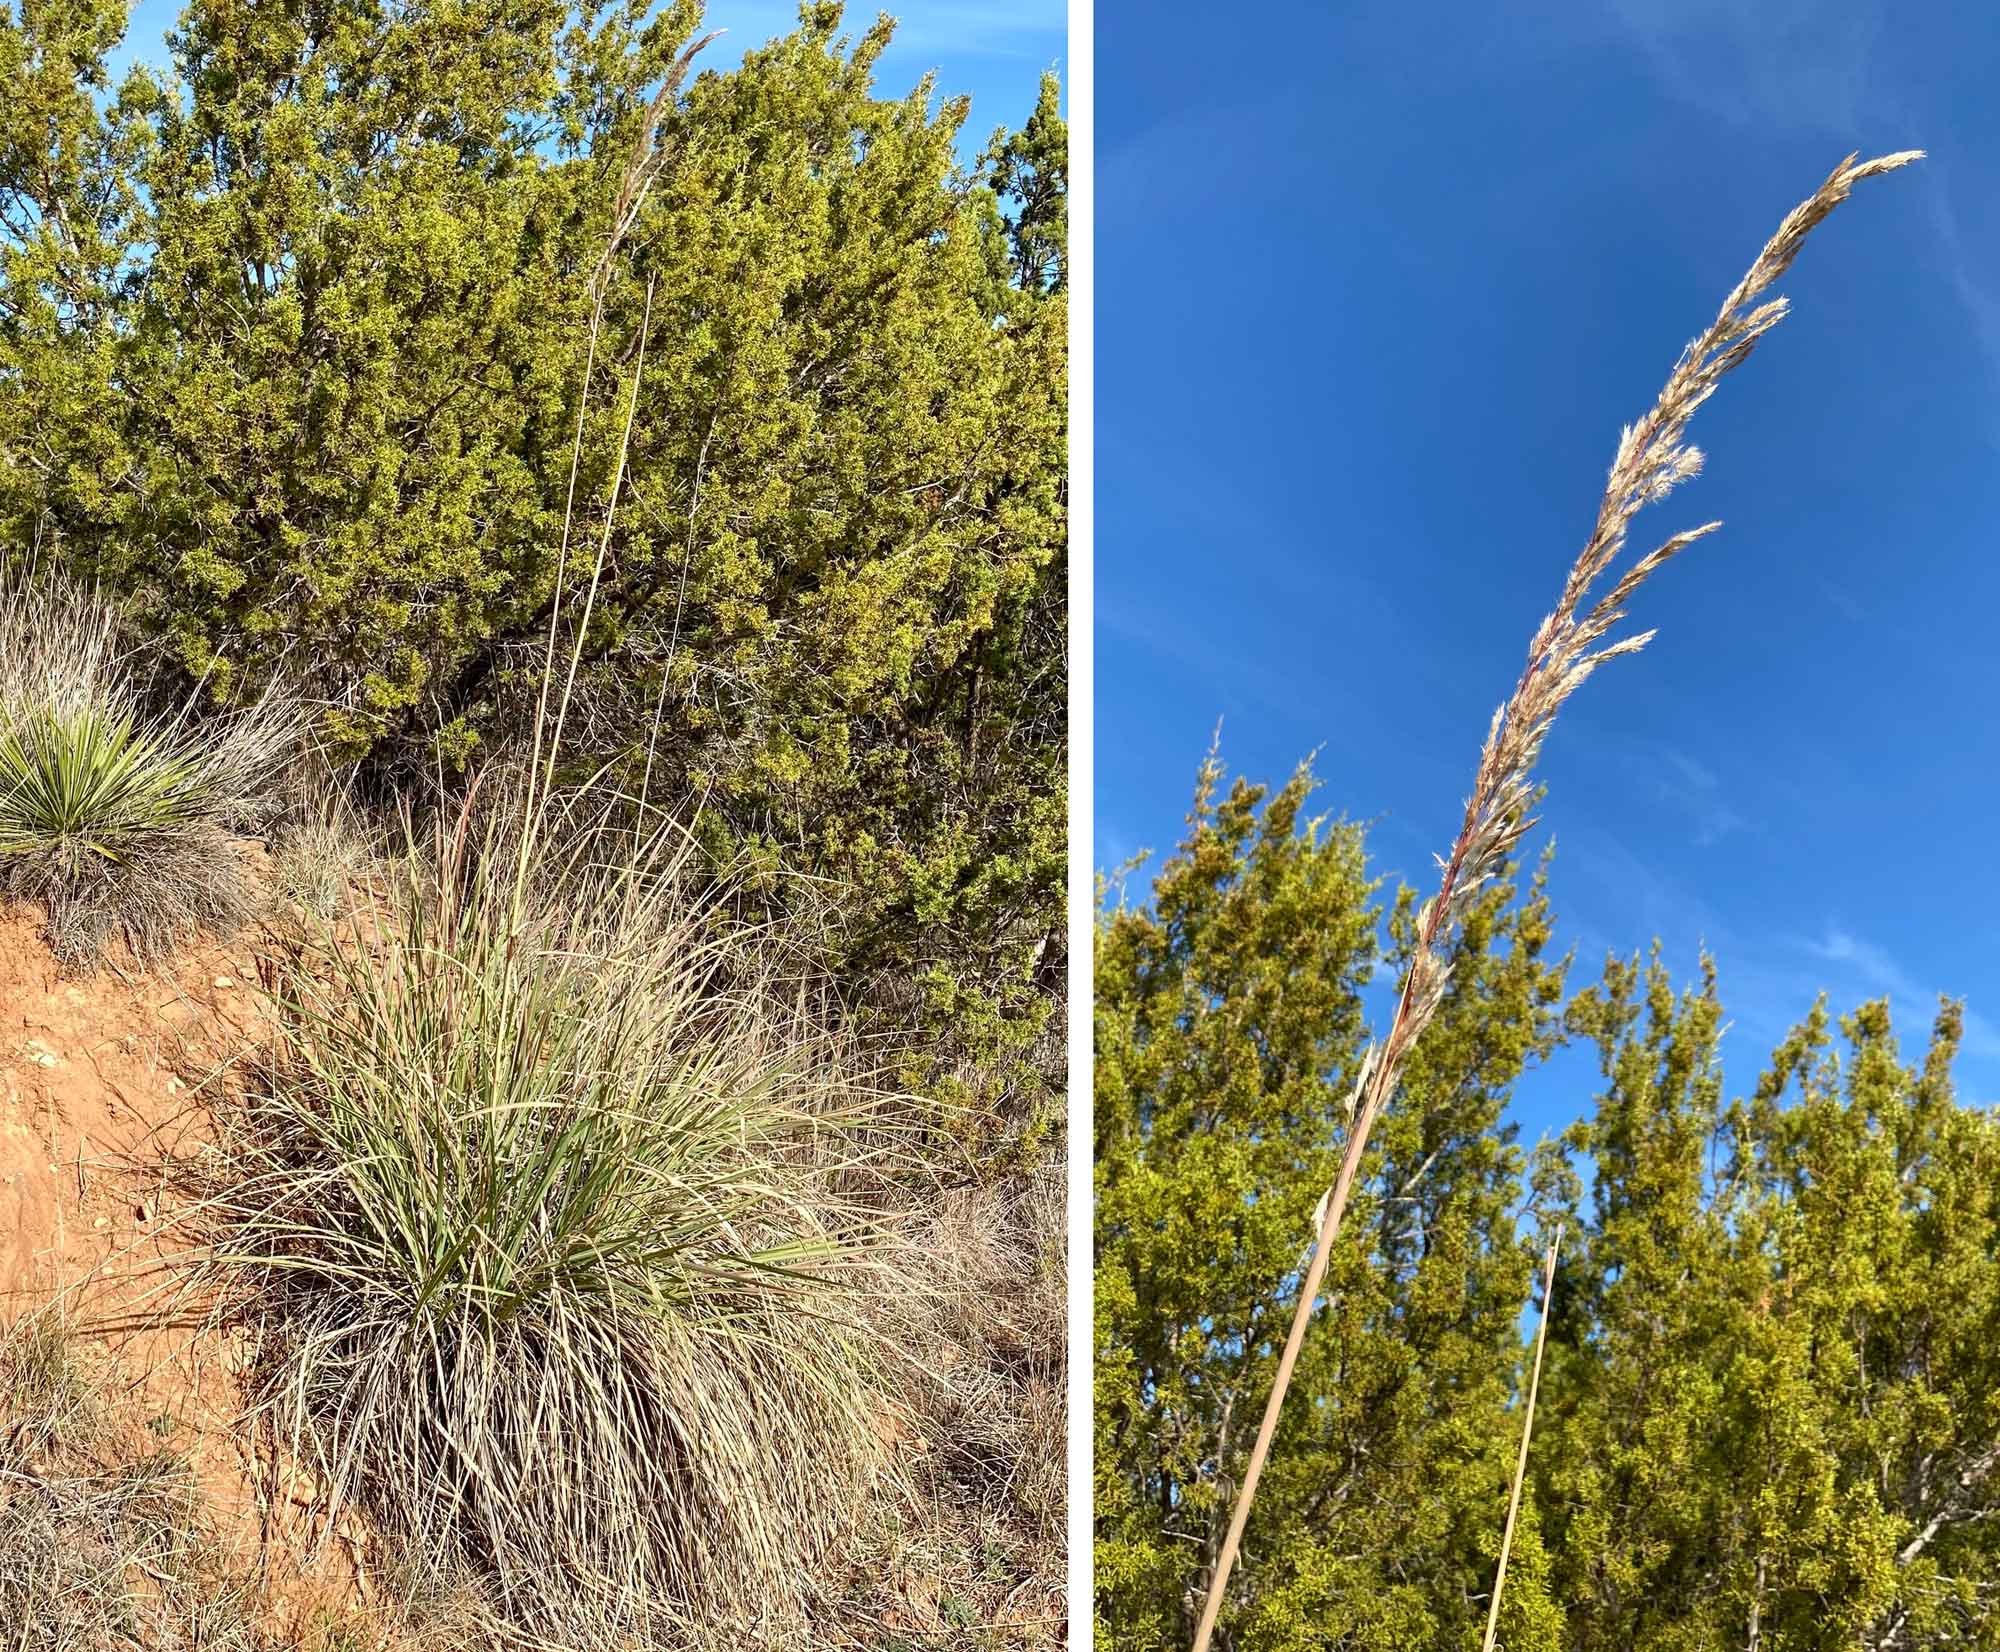 2-panel image showing photos of ravenna grass growing in Texas, U.S.A. Panel 1: Photo of a clump of ravenna grass growing on a steep dirt bank, with conifers rising in the background at the top of the bank. Panel 2: Detail of an inflorescence of ravenna grass. The flowering stalk is yellowish-brown and appears rather spent. Conifers can be seen in the background.